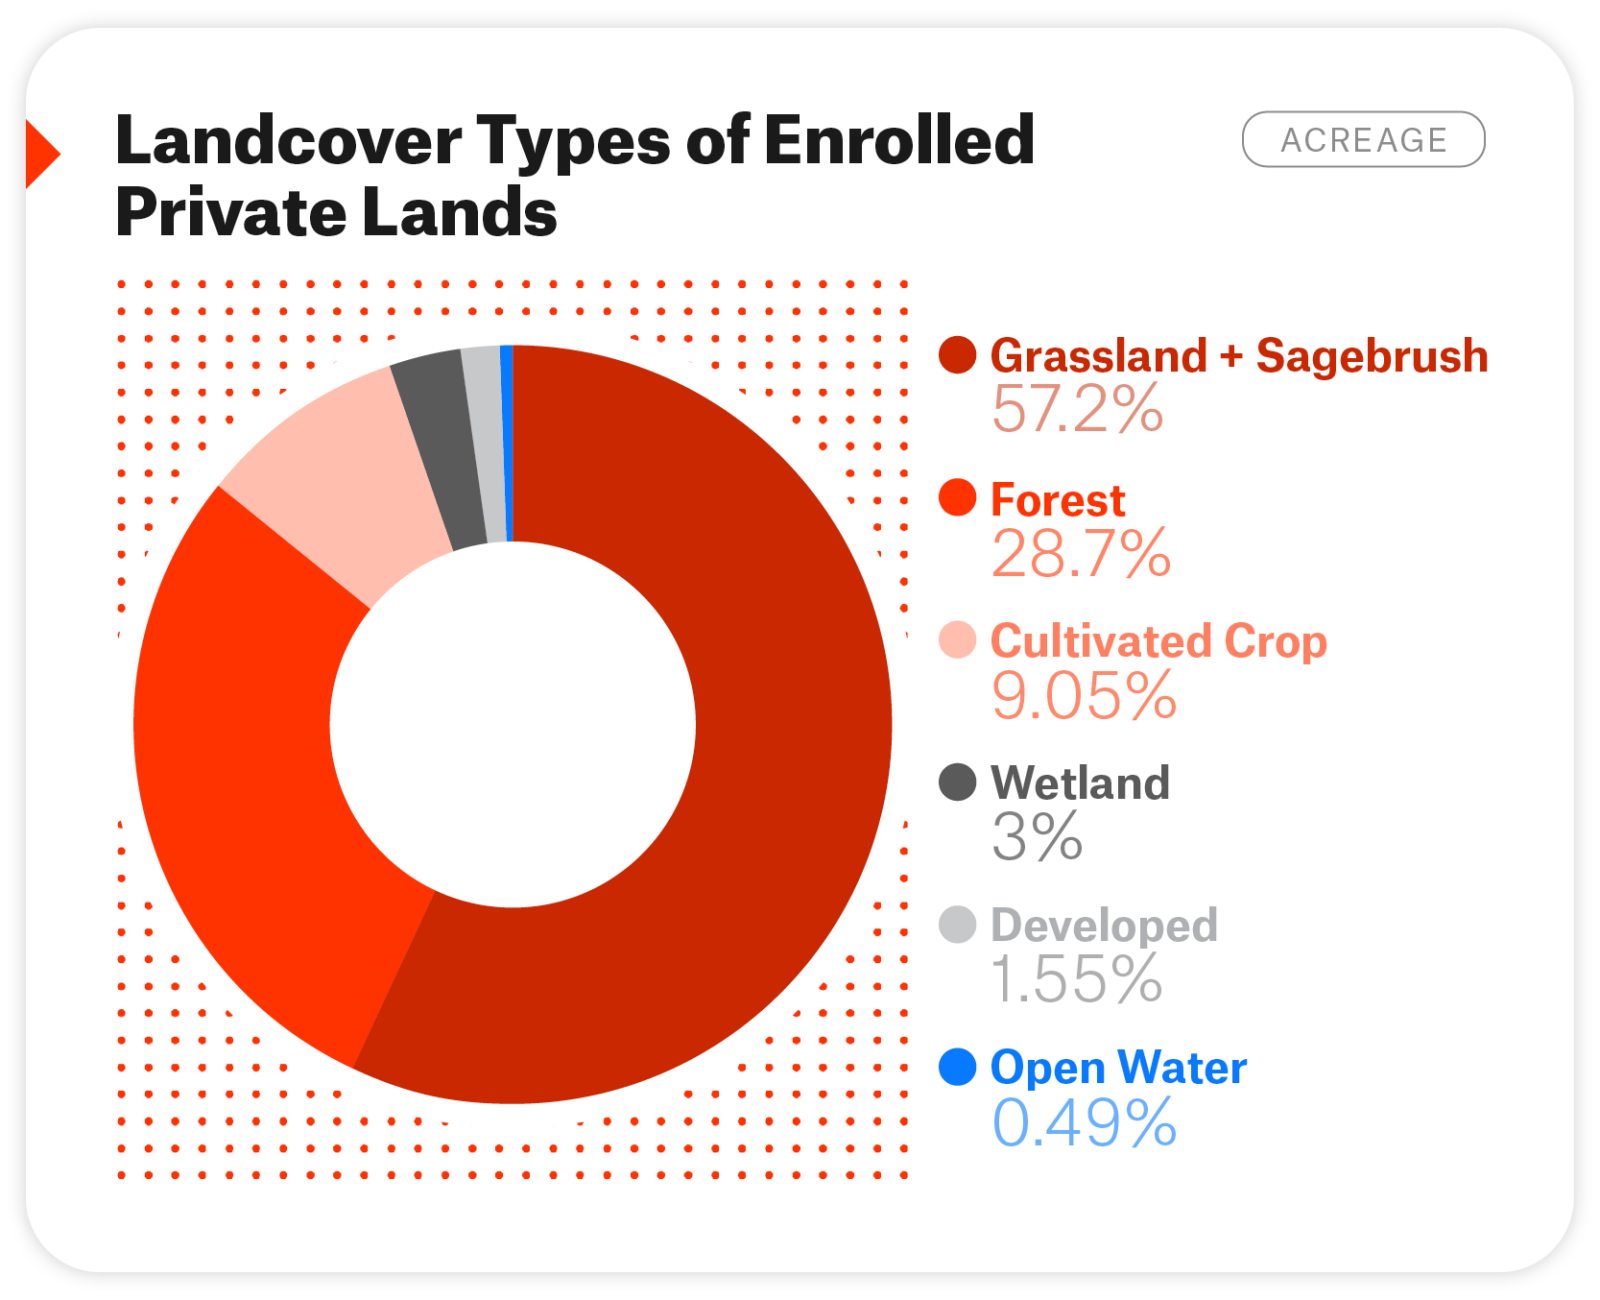 A pie graph showing landcover types of enrolled private lands. 